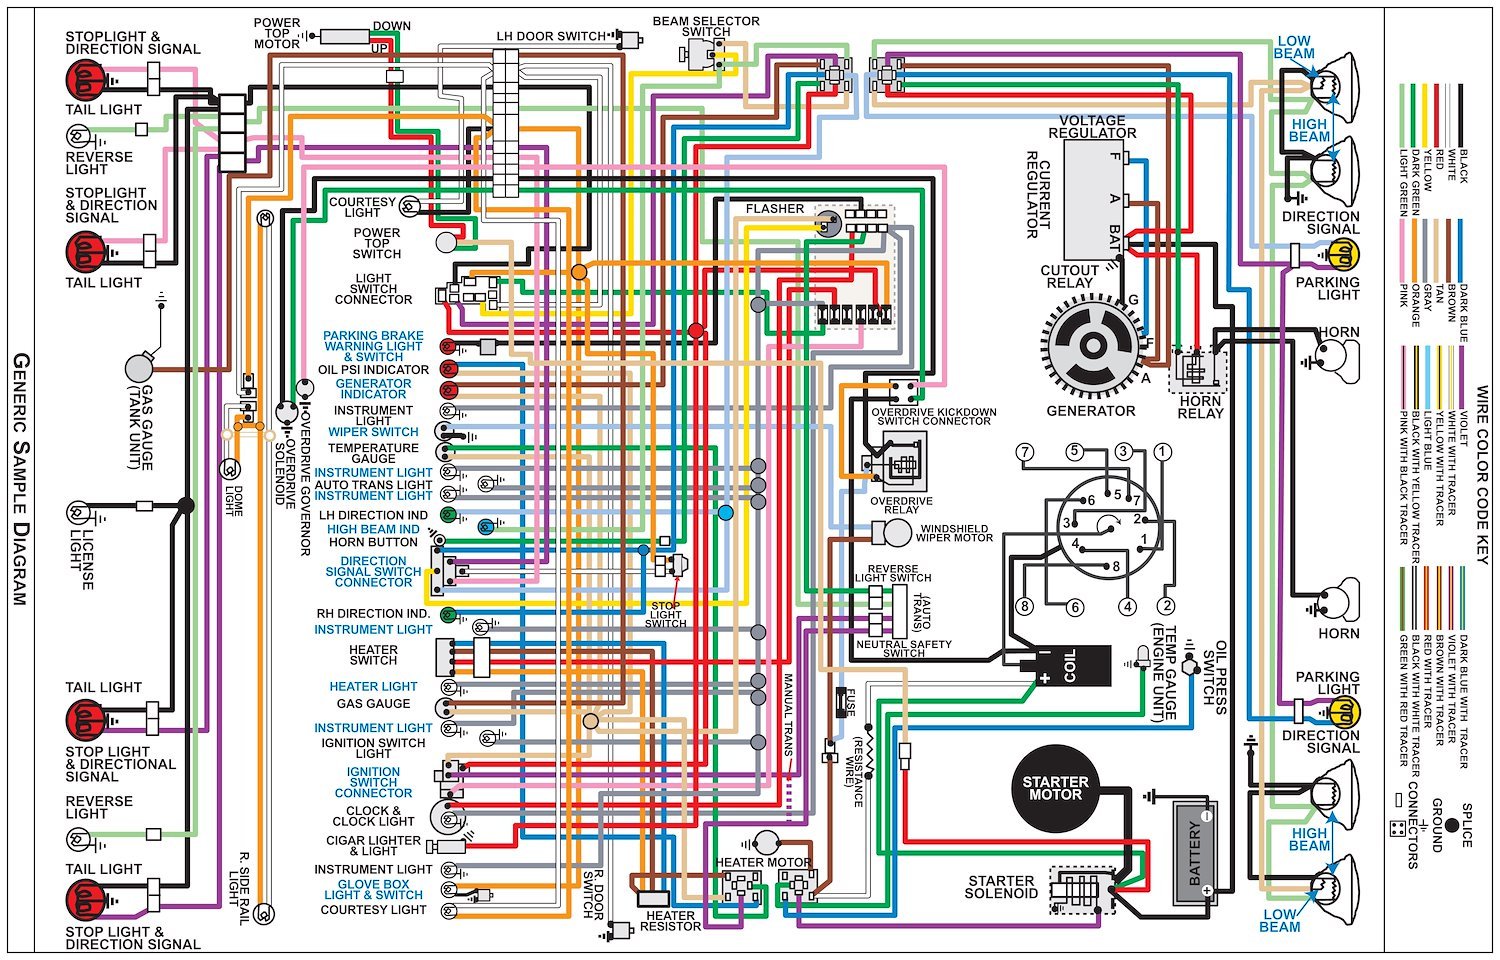 Wiring Diagram for 1963 Ford Galaxie, 11 in x 17 in., Laminated